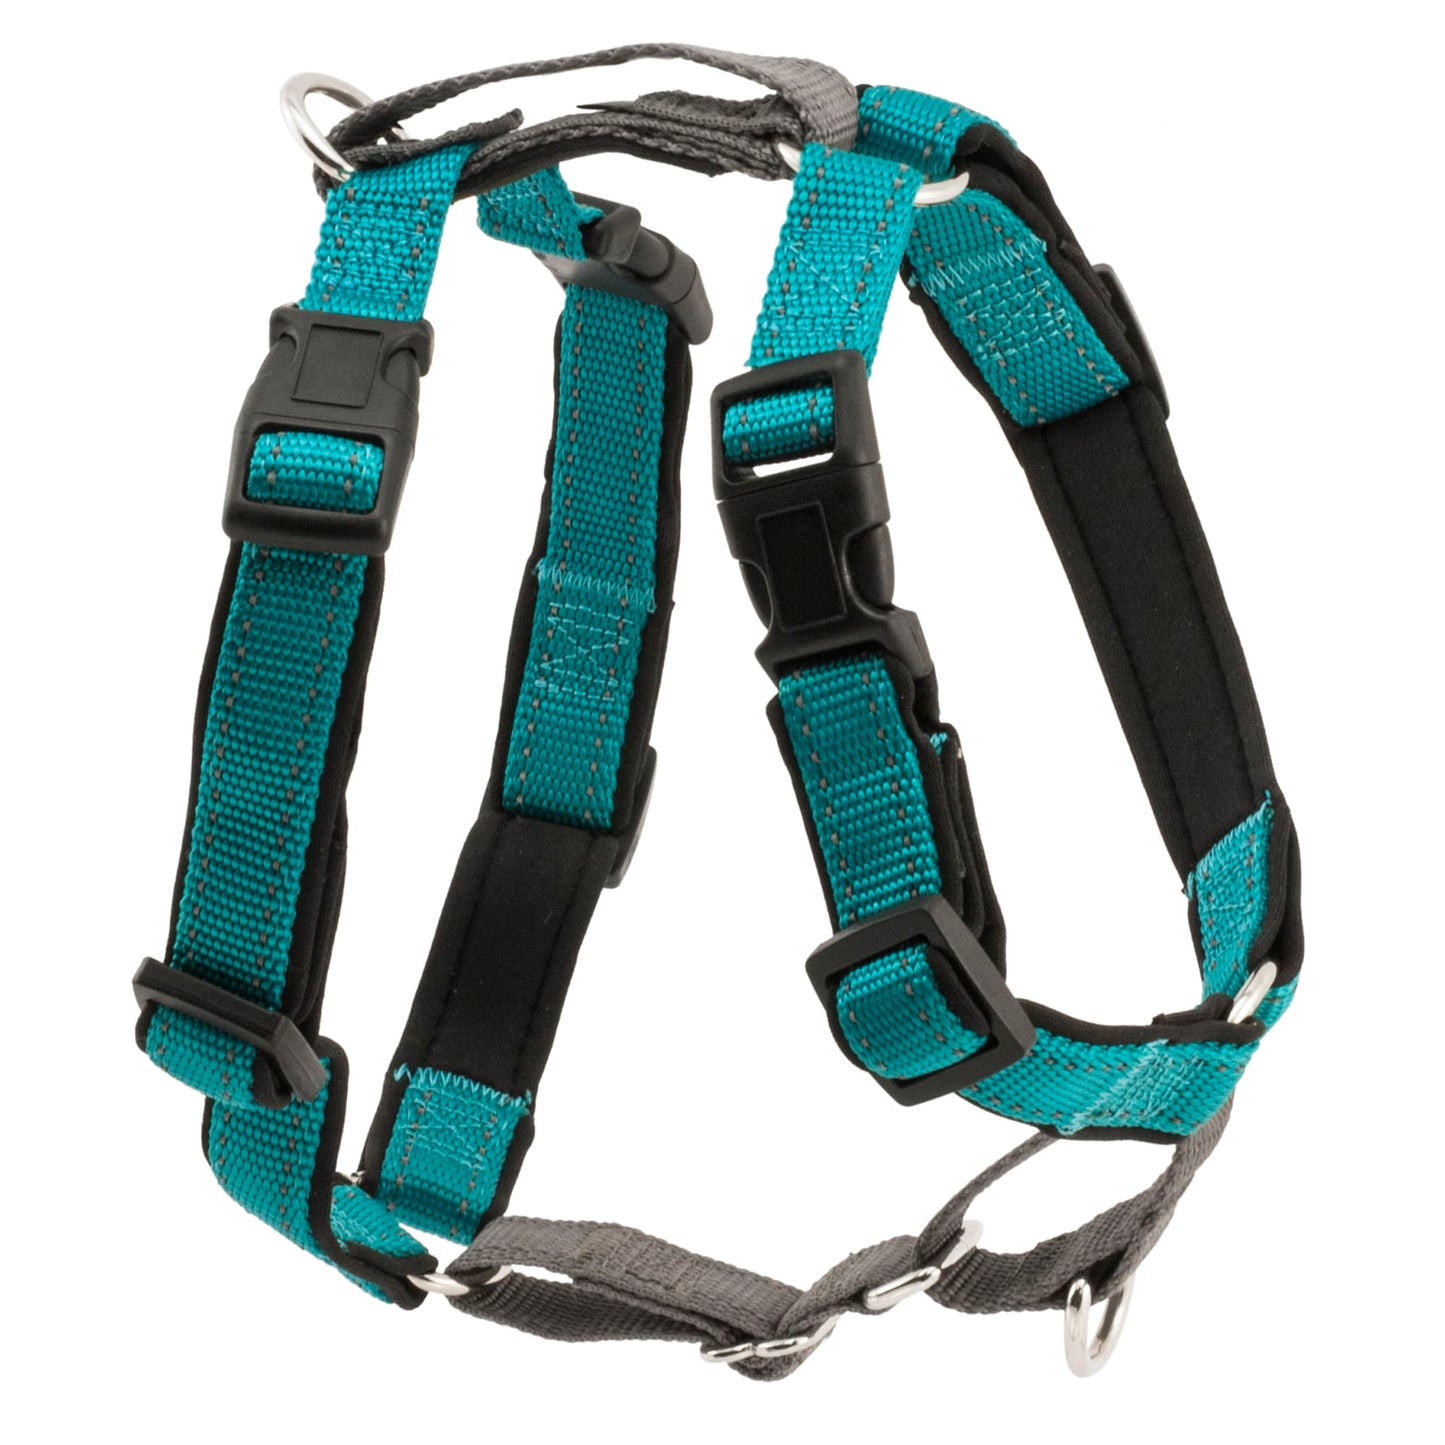 PetSafe 3 in 1 Harness  No-Pull Dog Harness and Car Restraint  Small  Teal